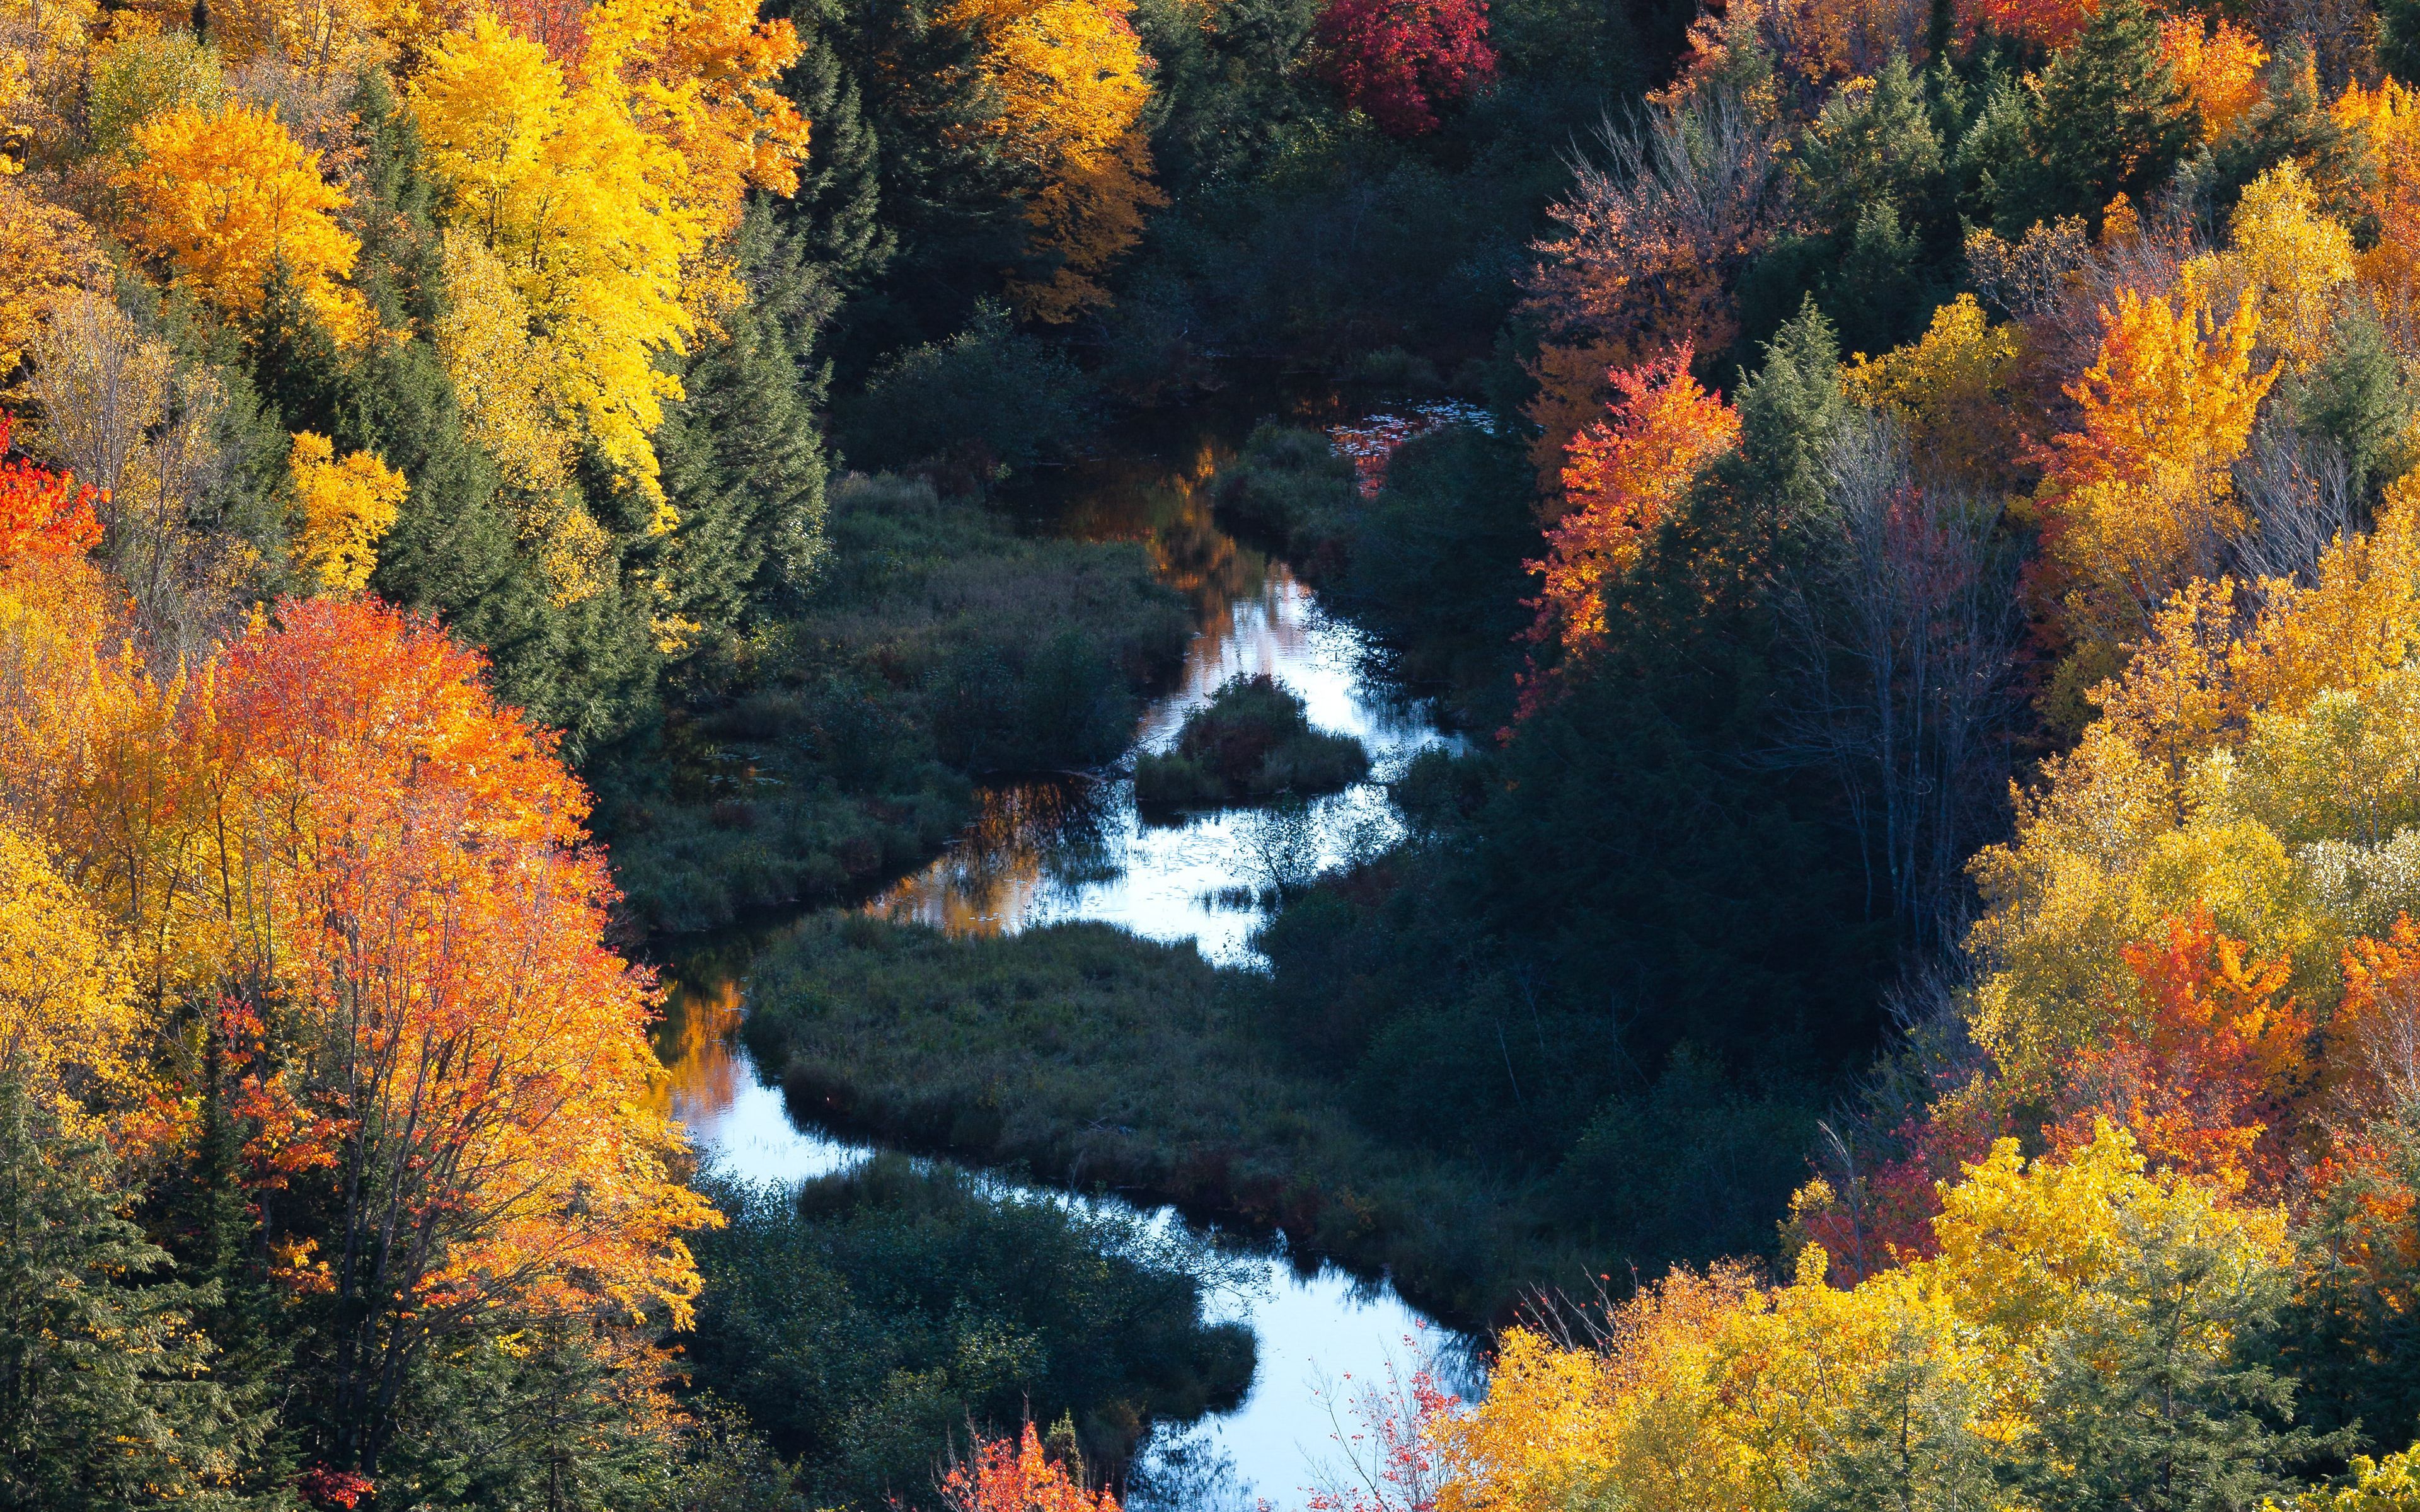 Download wallpaper 3840x2400 forest, river, aerial view, autumn